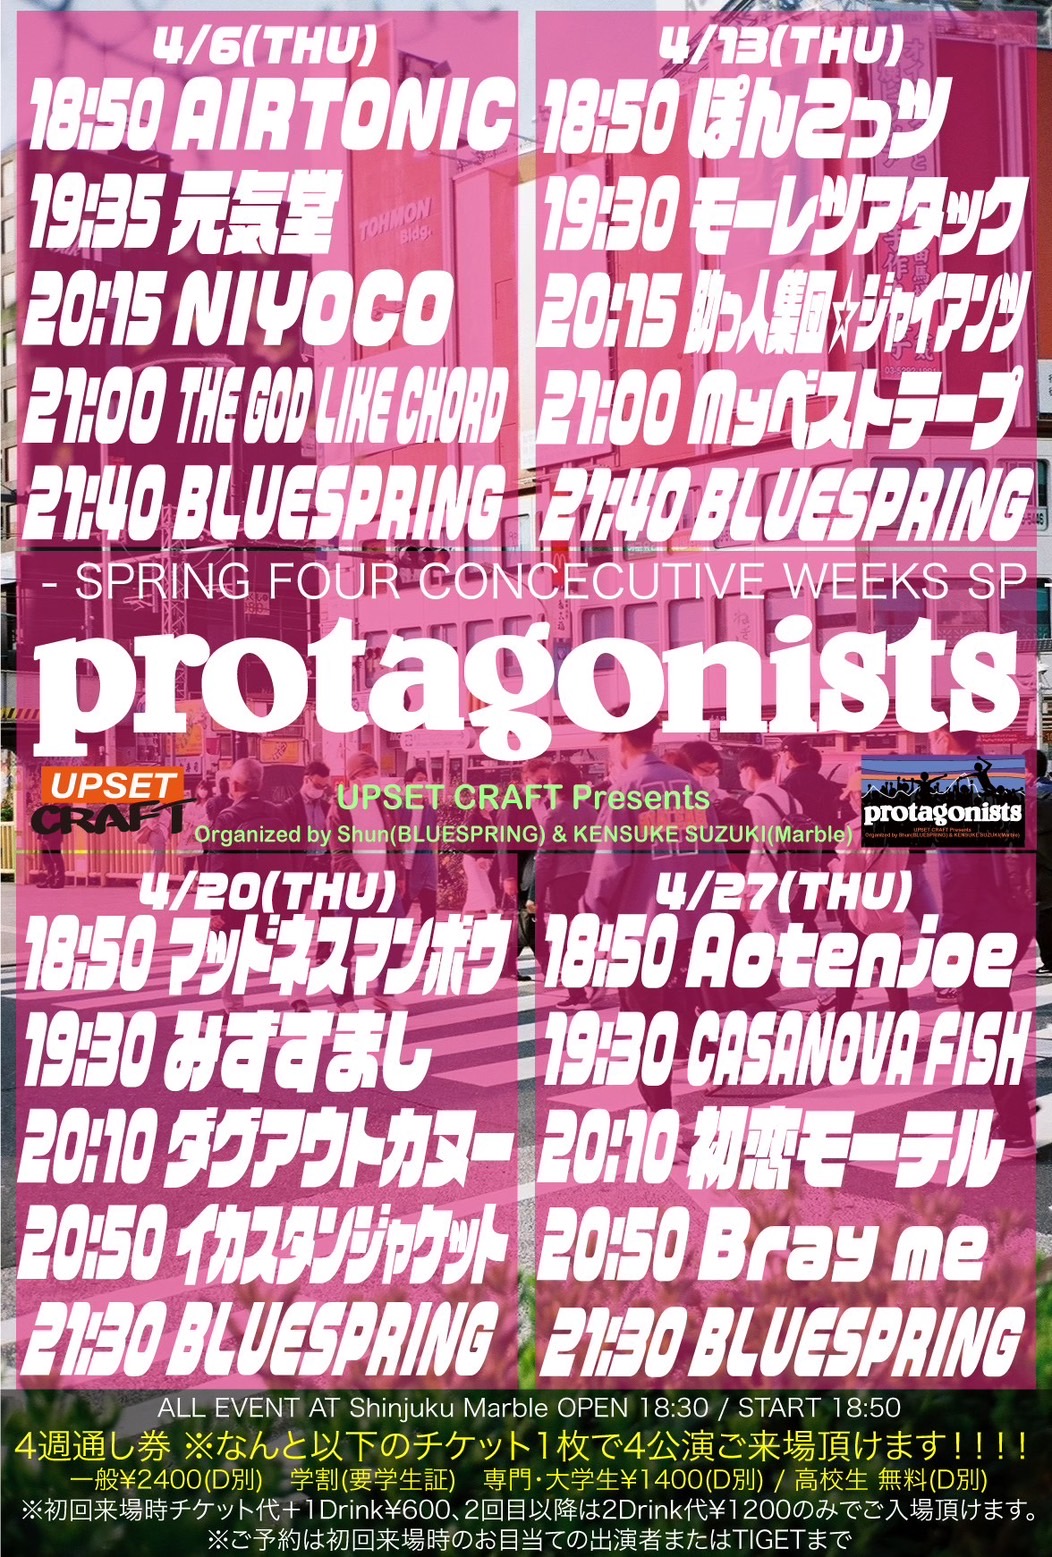 UPSET CRAFT presents「protagonists」 -SPRING FOUR CONCECUTIVE WEEKS SP –